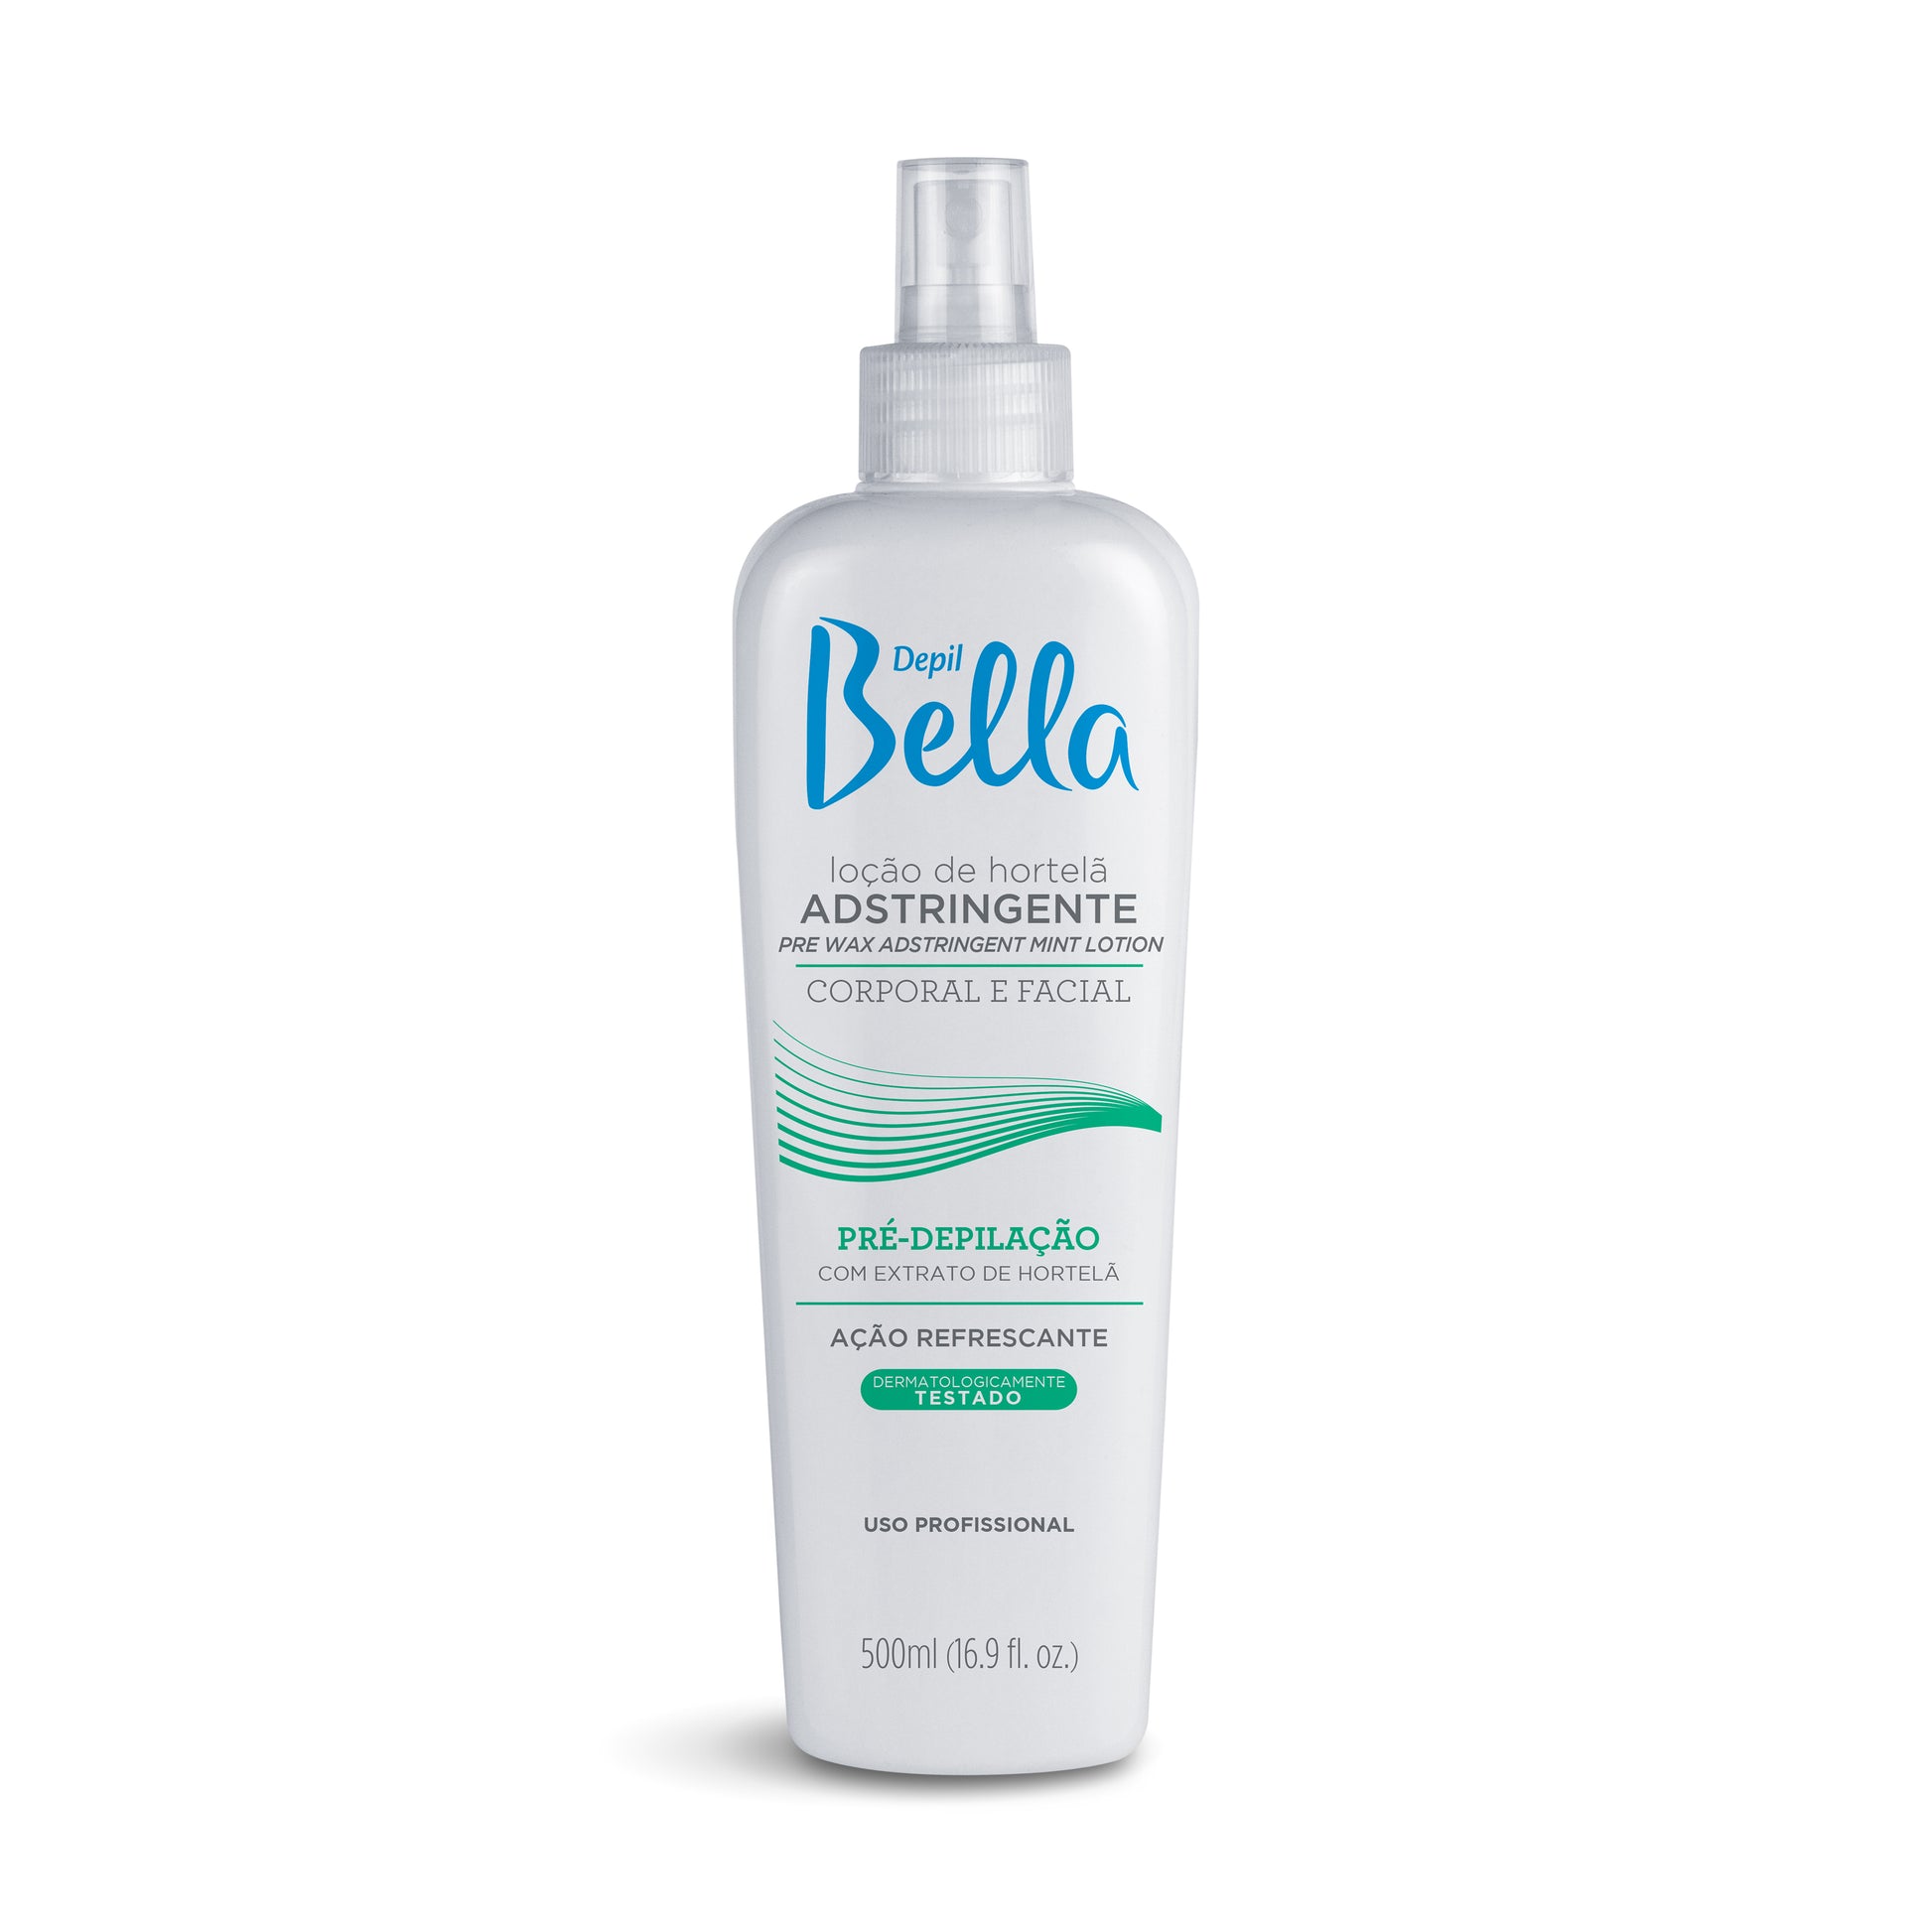 Kit Depil Bella, 1 unit Post Waxing Oil Remover and 1 unit Pre Waxing Astringent. - Depilcompany